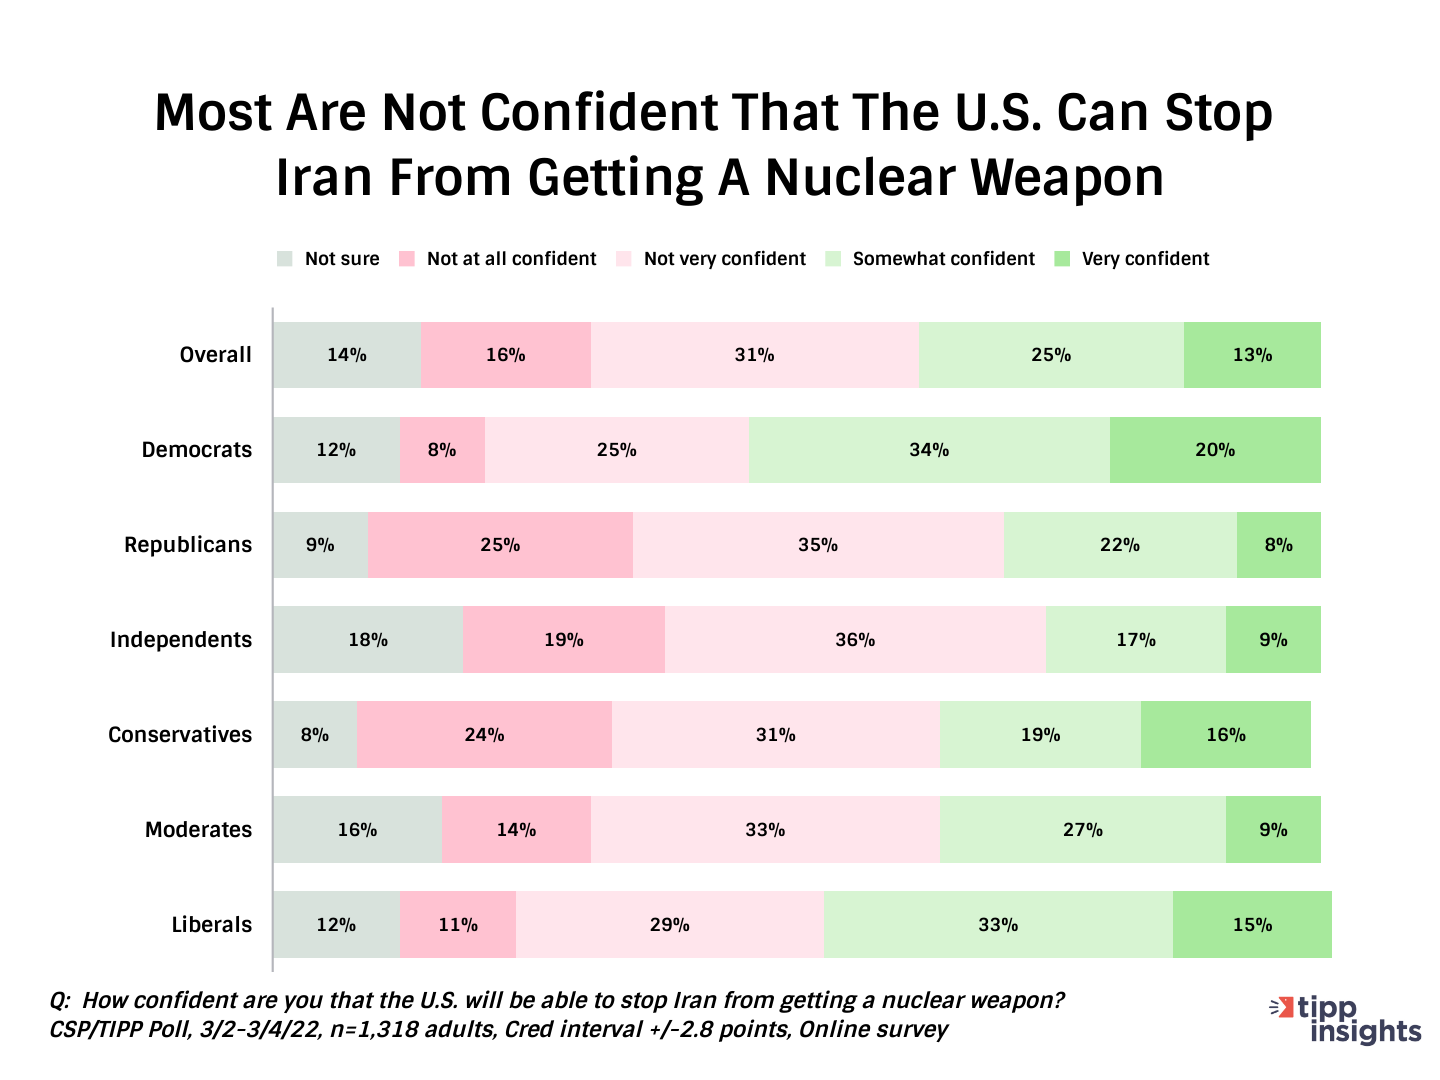 Most are not confident that the U.S. can stop Iran from getting a nuclear weapon